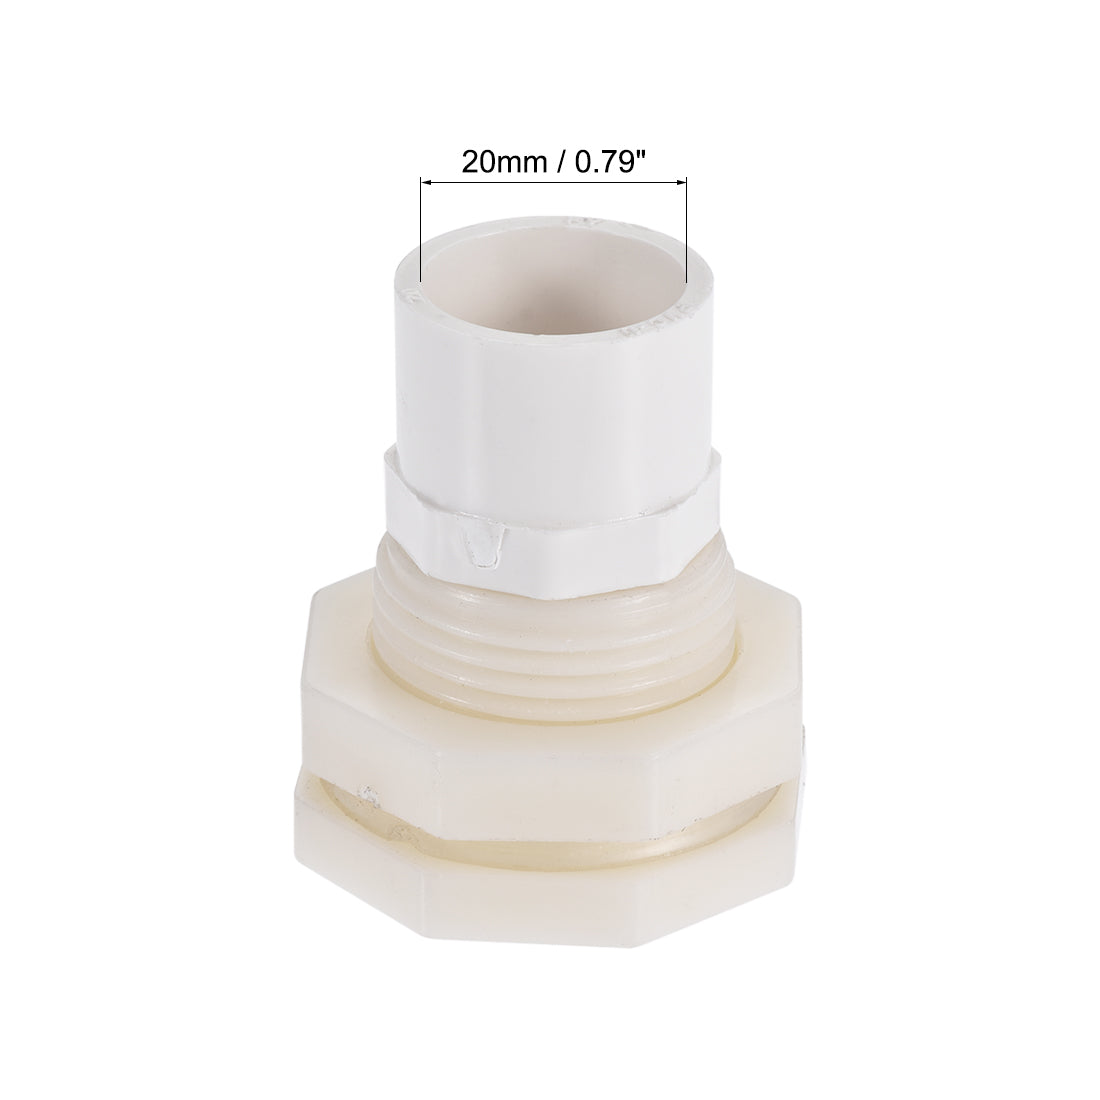 uxcell Uxcell Bulkhead Fitting, G1/2 Female 1.12" Male, Tube Adaptor Fitting, with Silicone Gasket and Pipe Connector, for Water Tanks, PVC, White